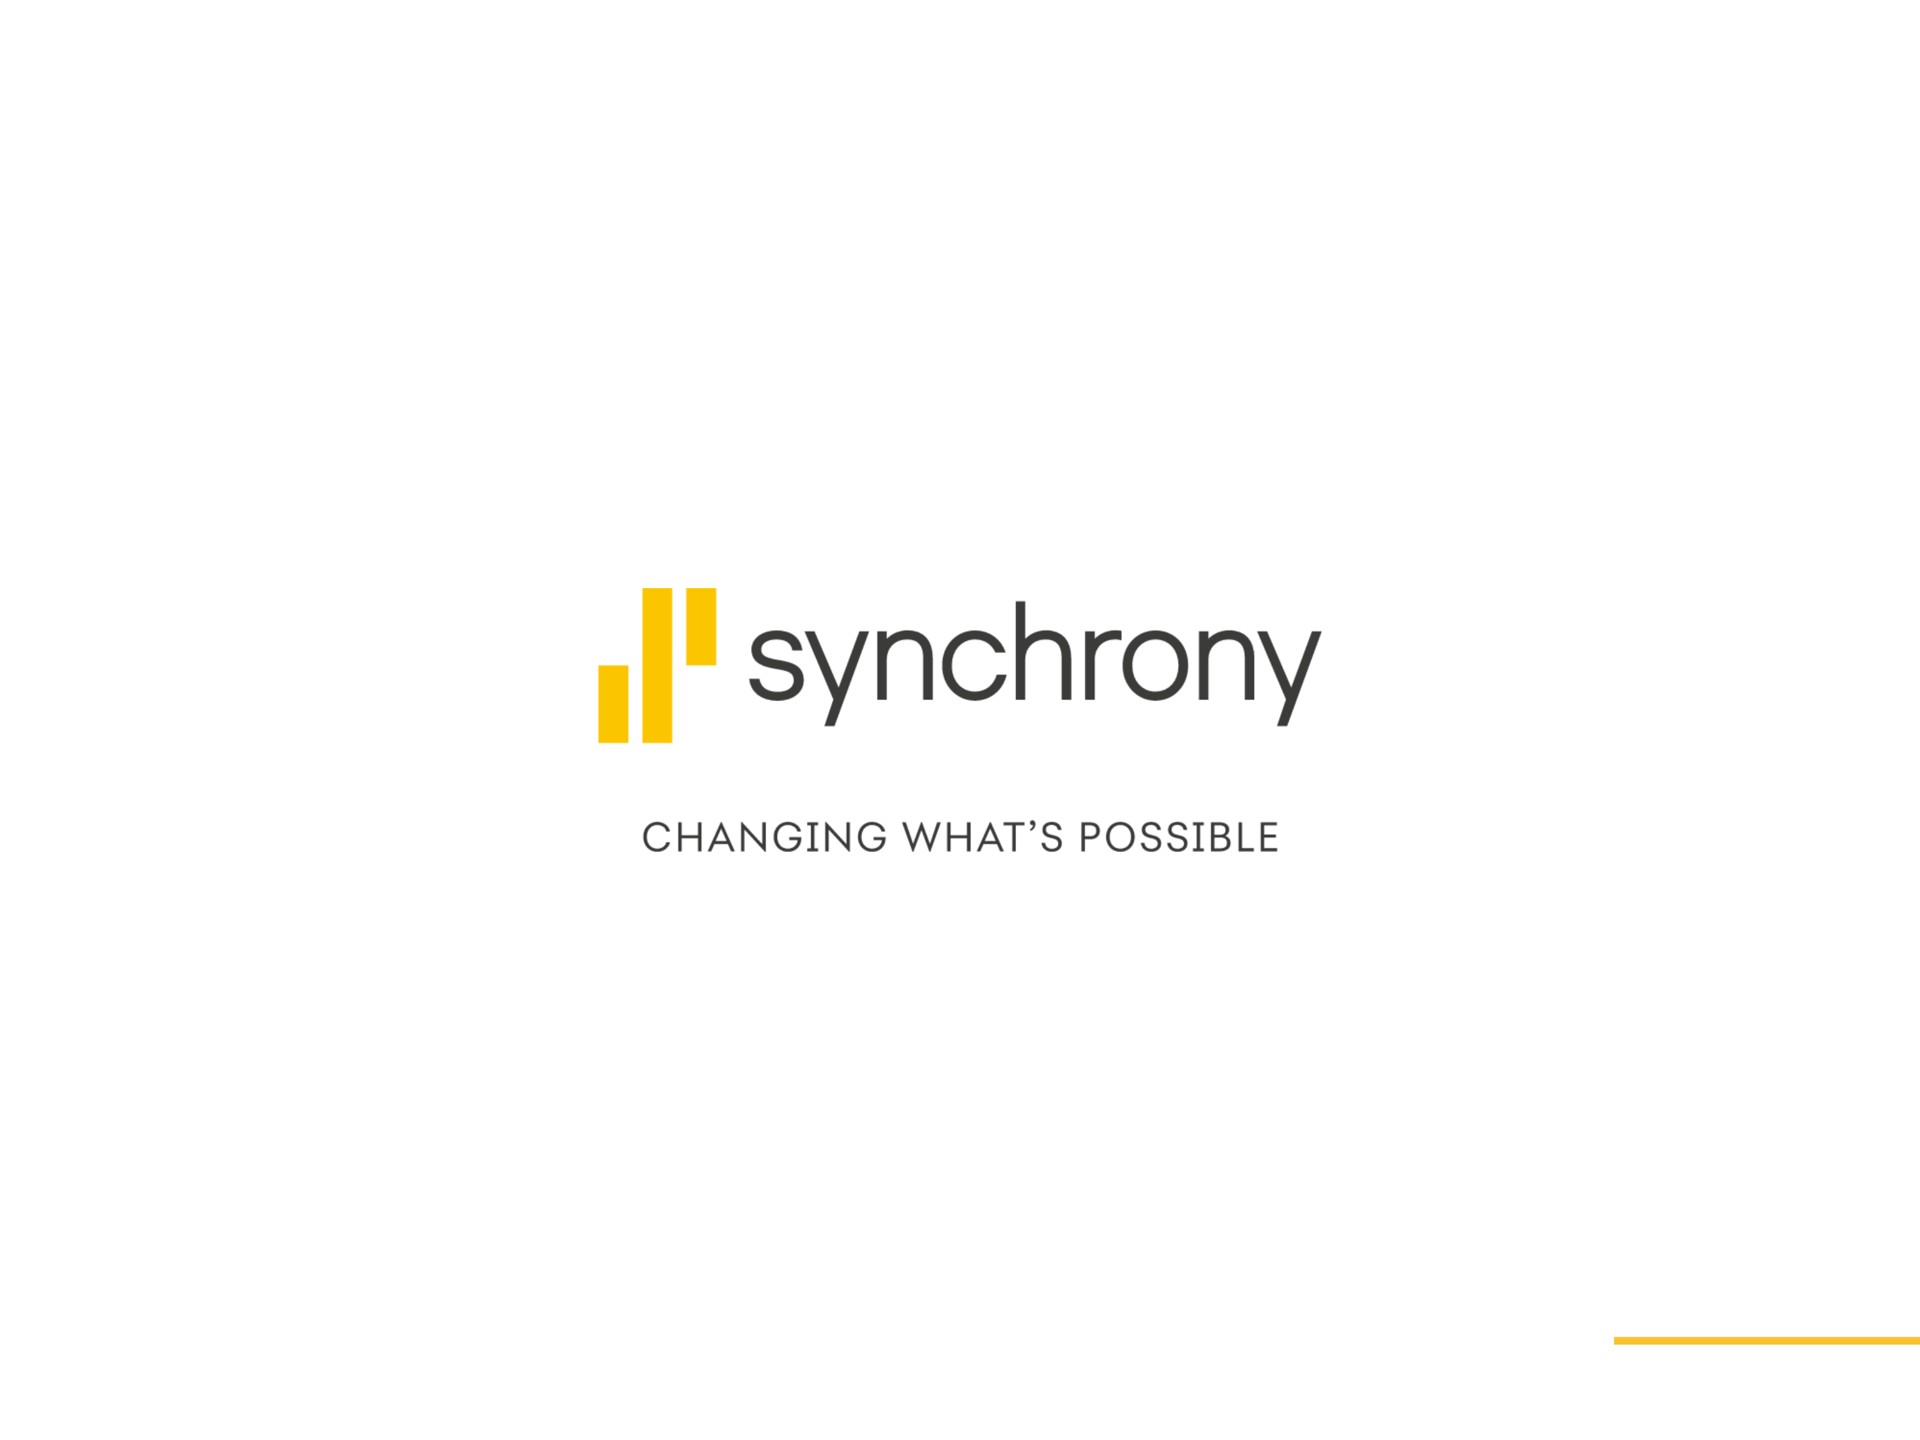 synchrony changing what possible | Synchrony Financial